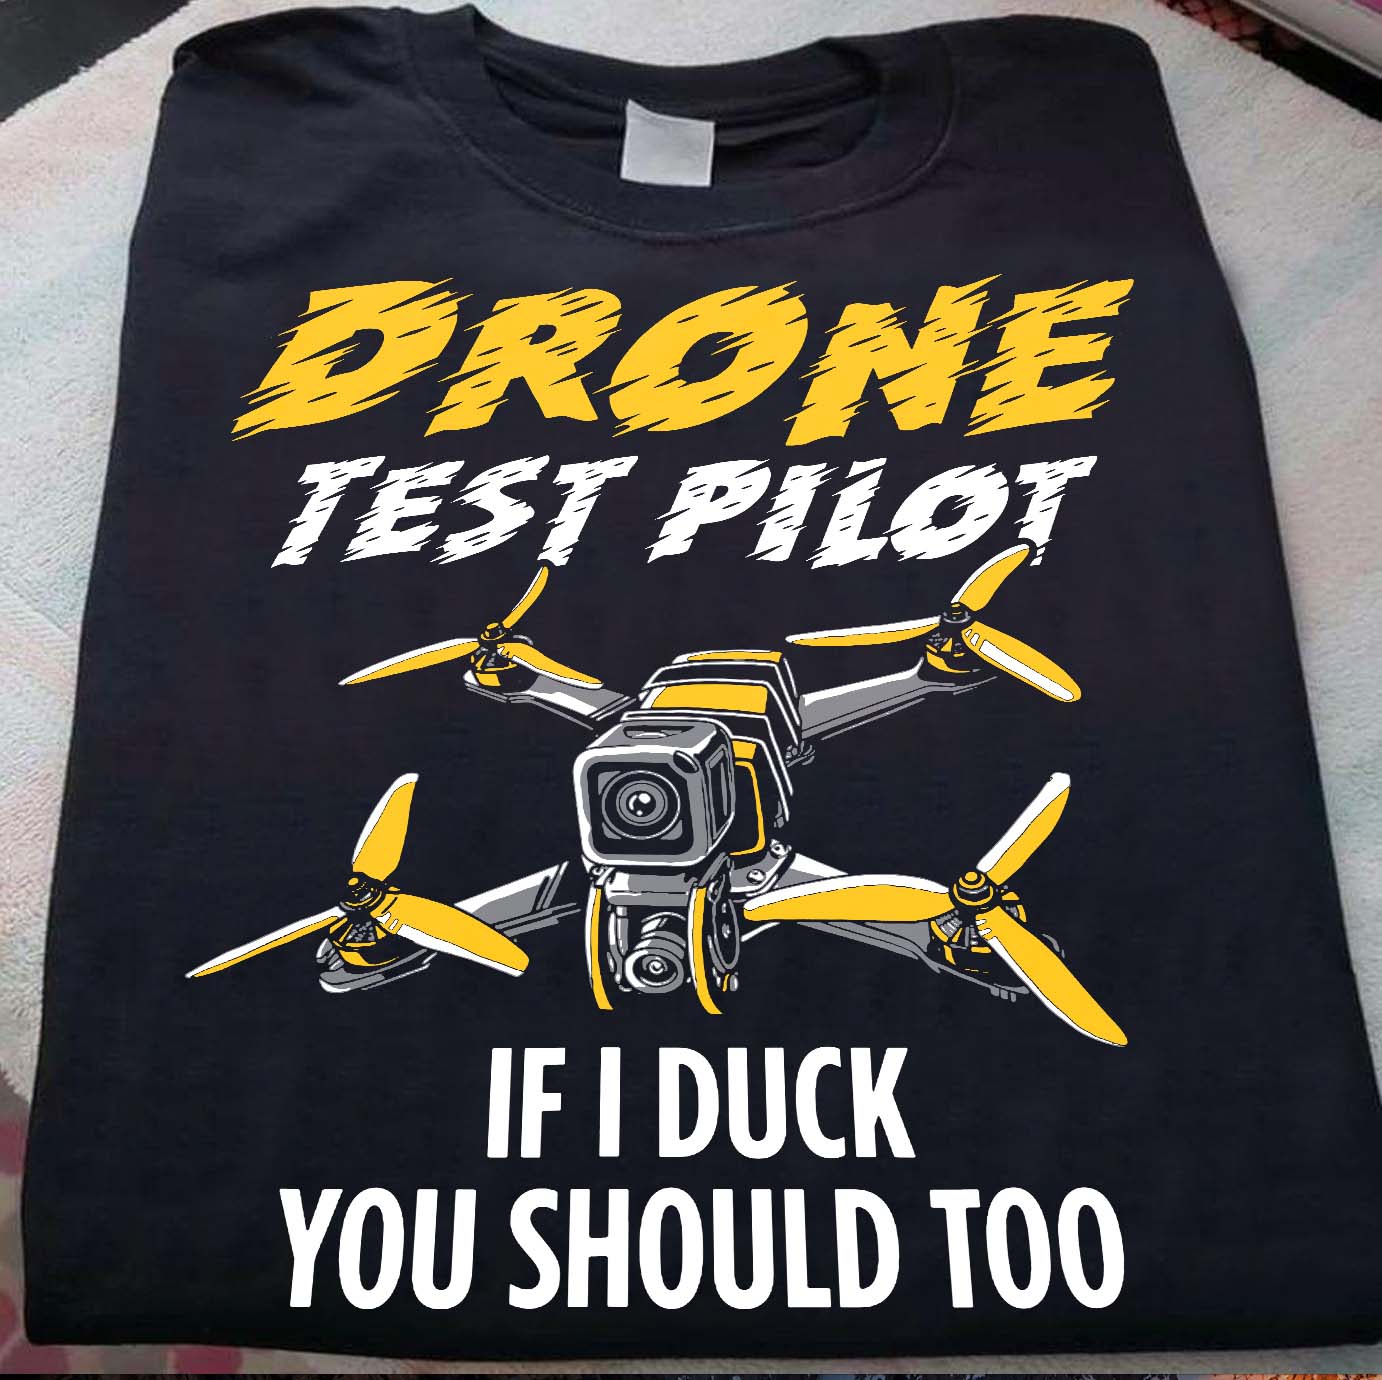 Drone test pilot if I duck you should too - Pilot the job